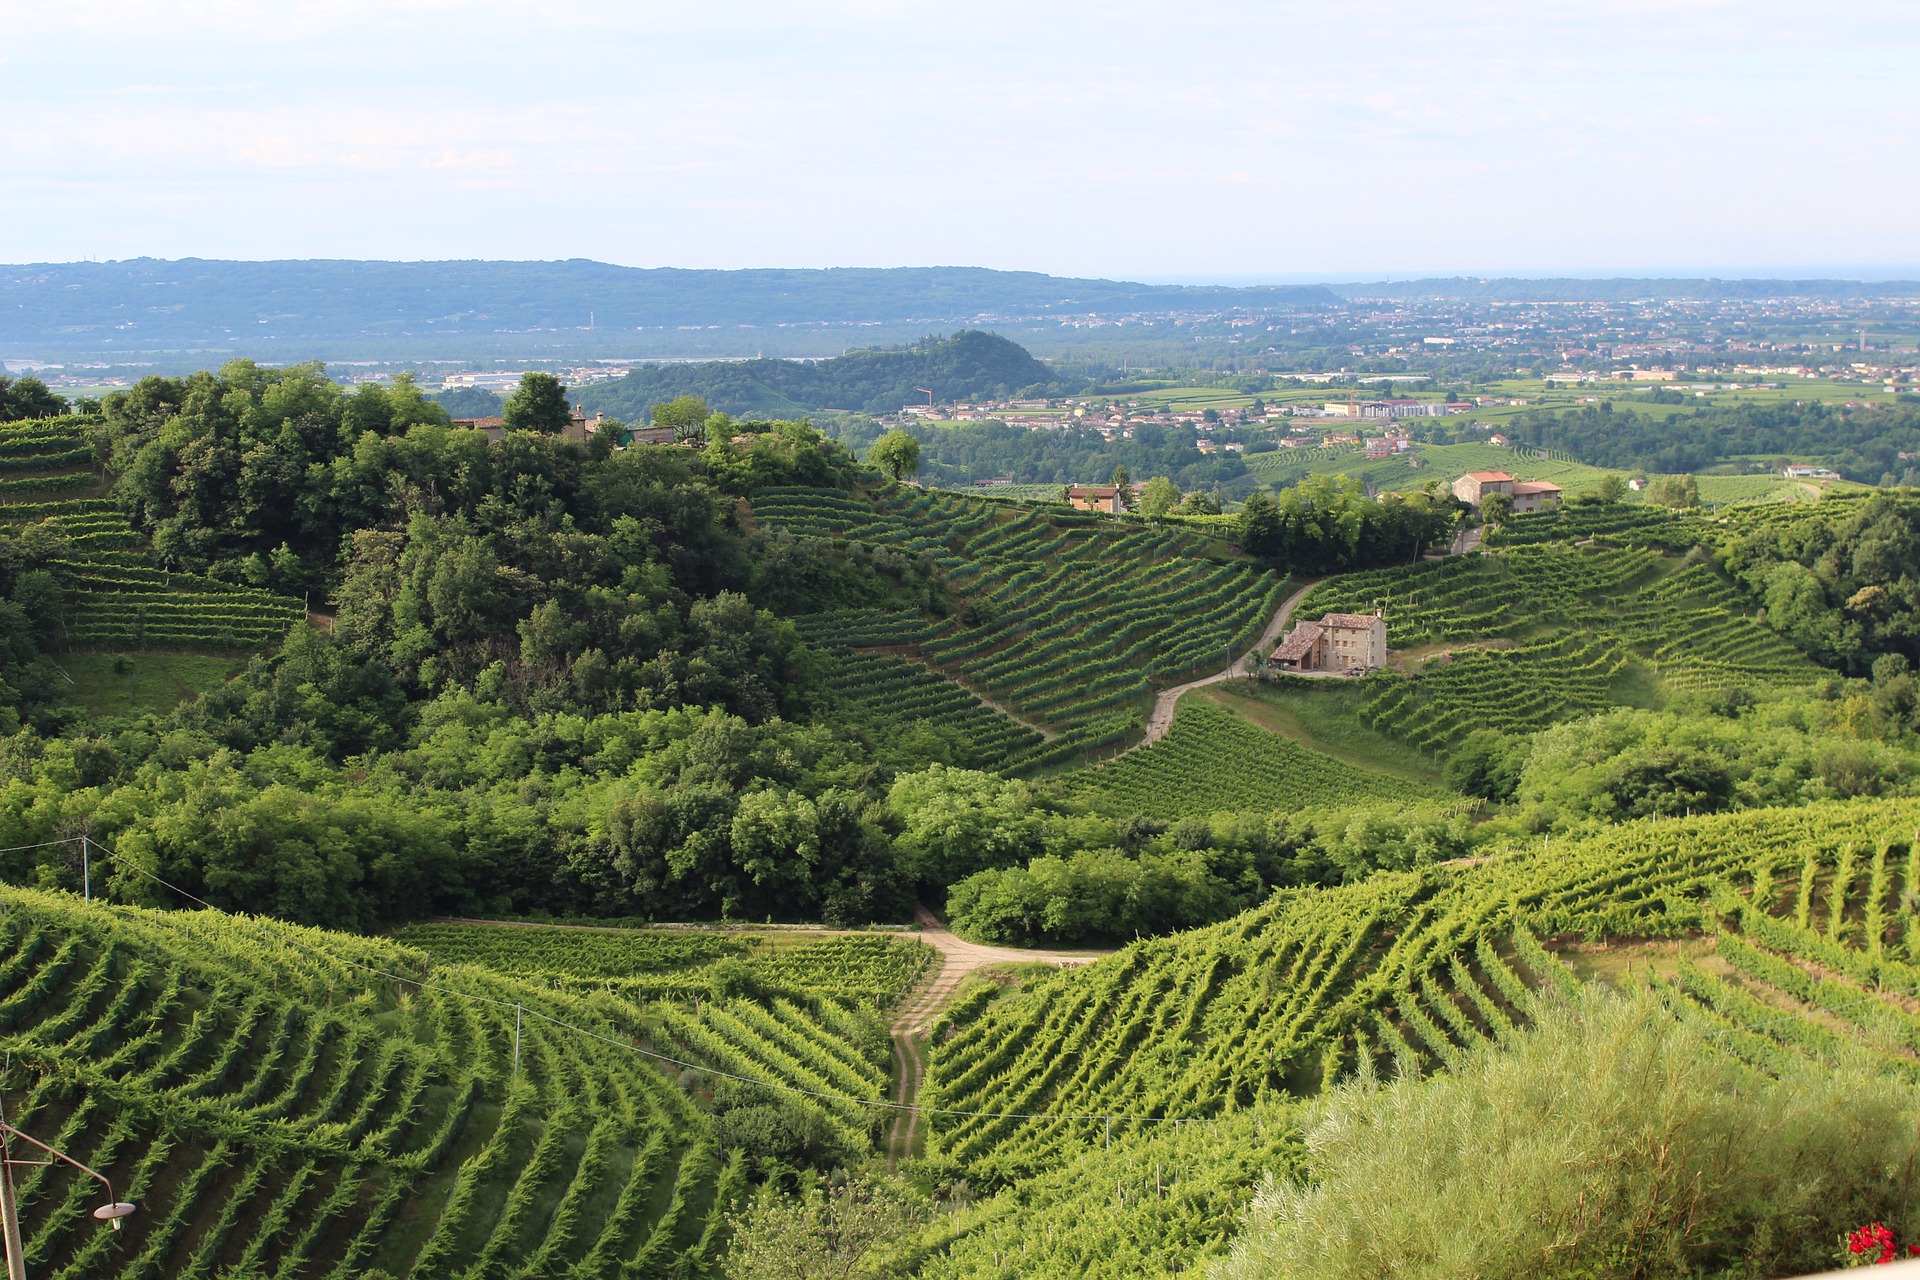 View of green vines on sloping hills in Veneto